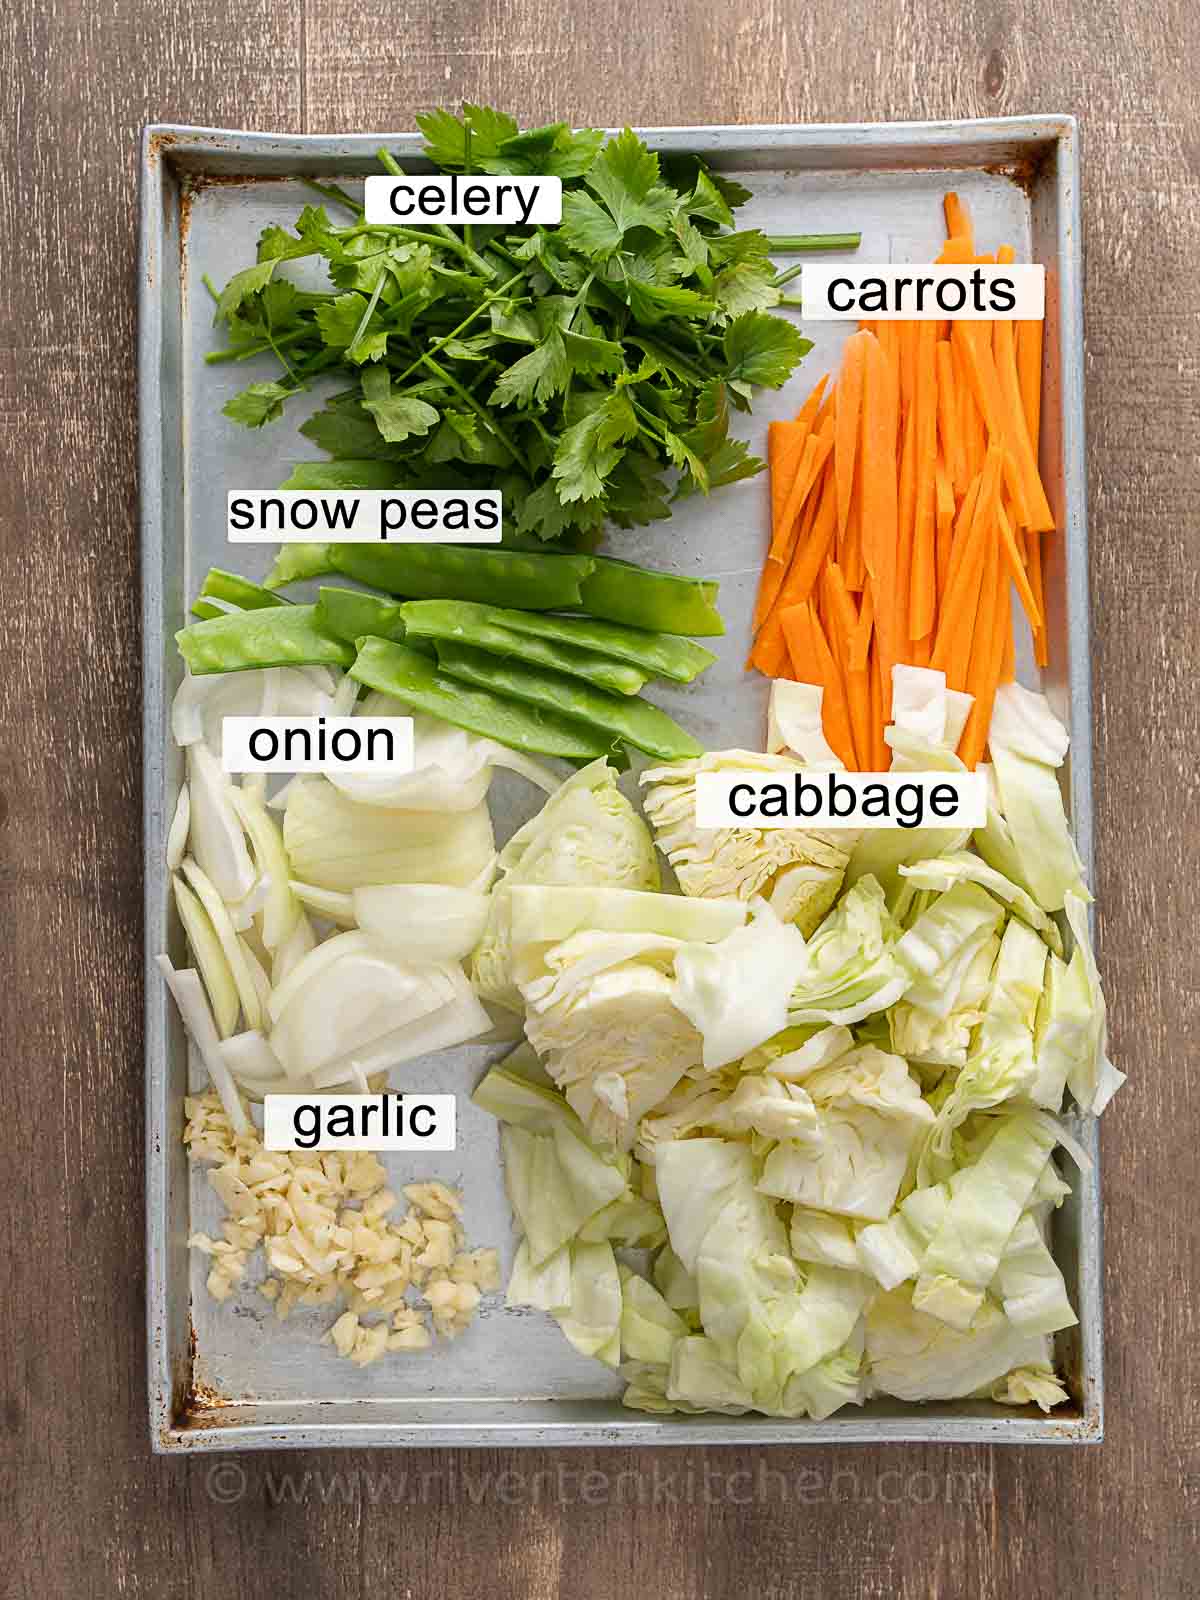 Cabbage, celery, carrots, garlic, onion and snow peas.